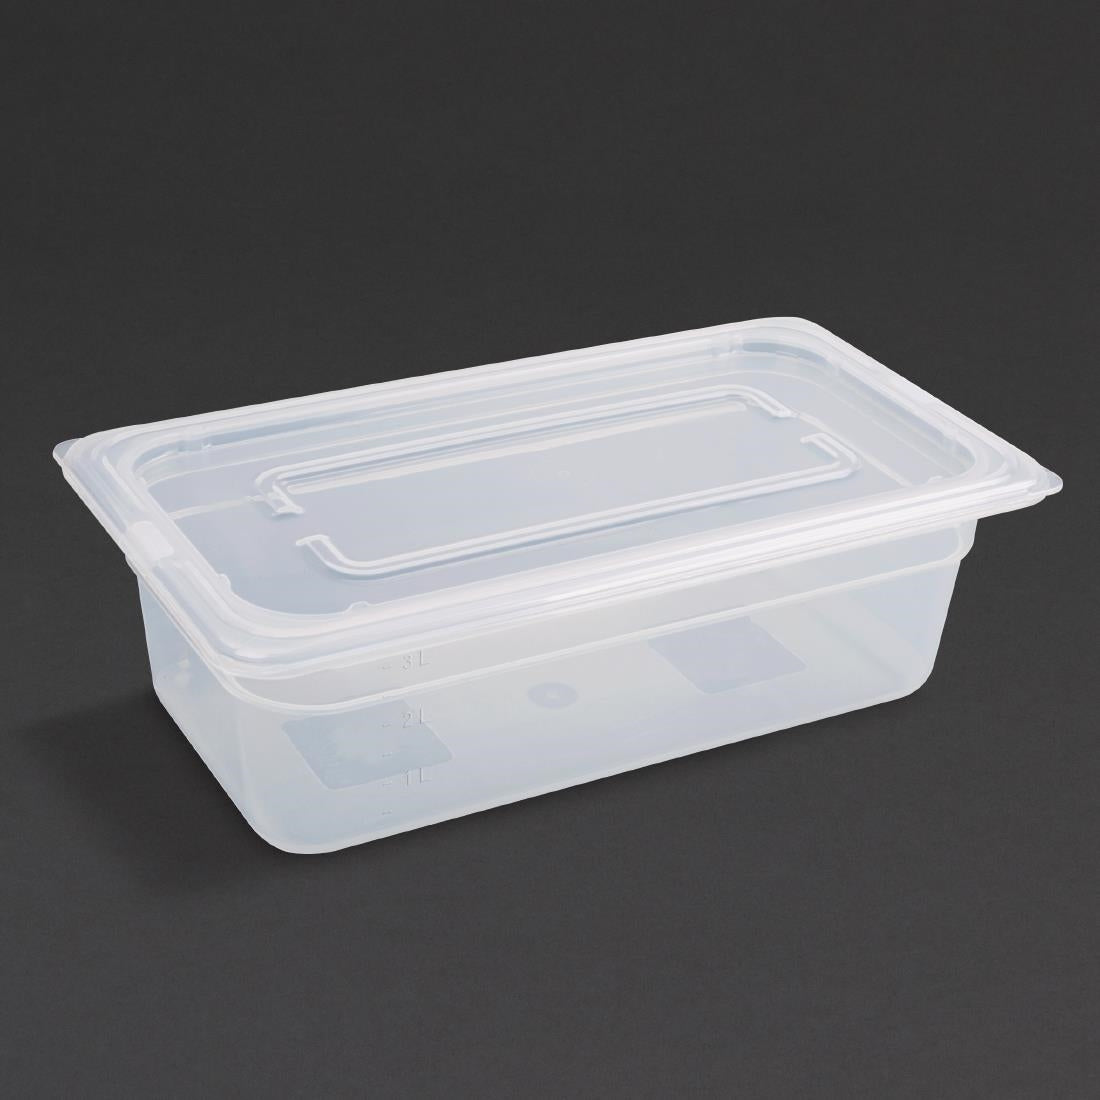 Vogue Polypropylene 1/3 Gastronorm Tray 200mm